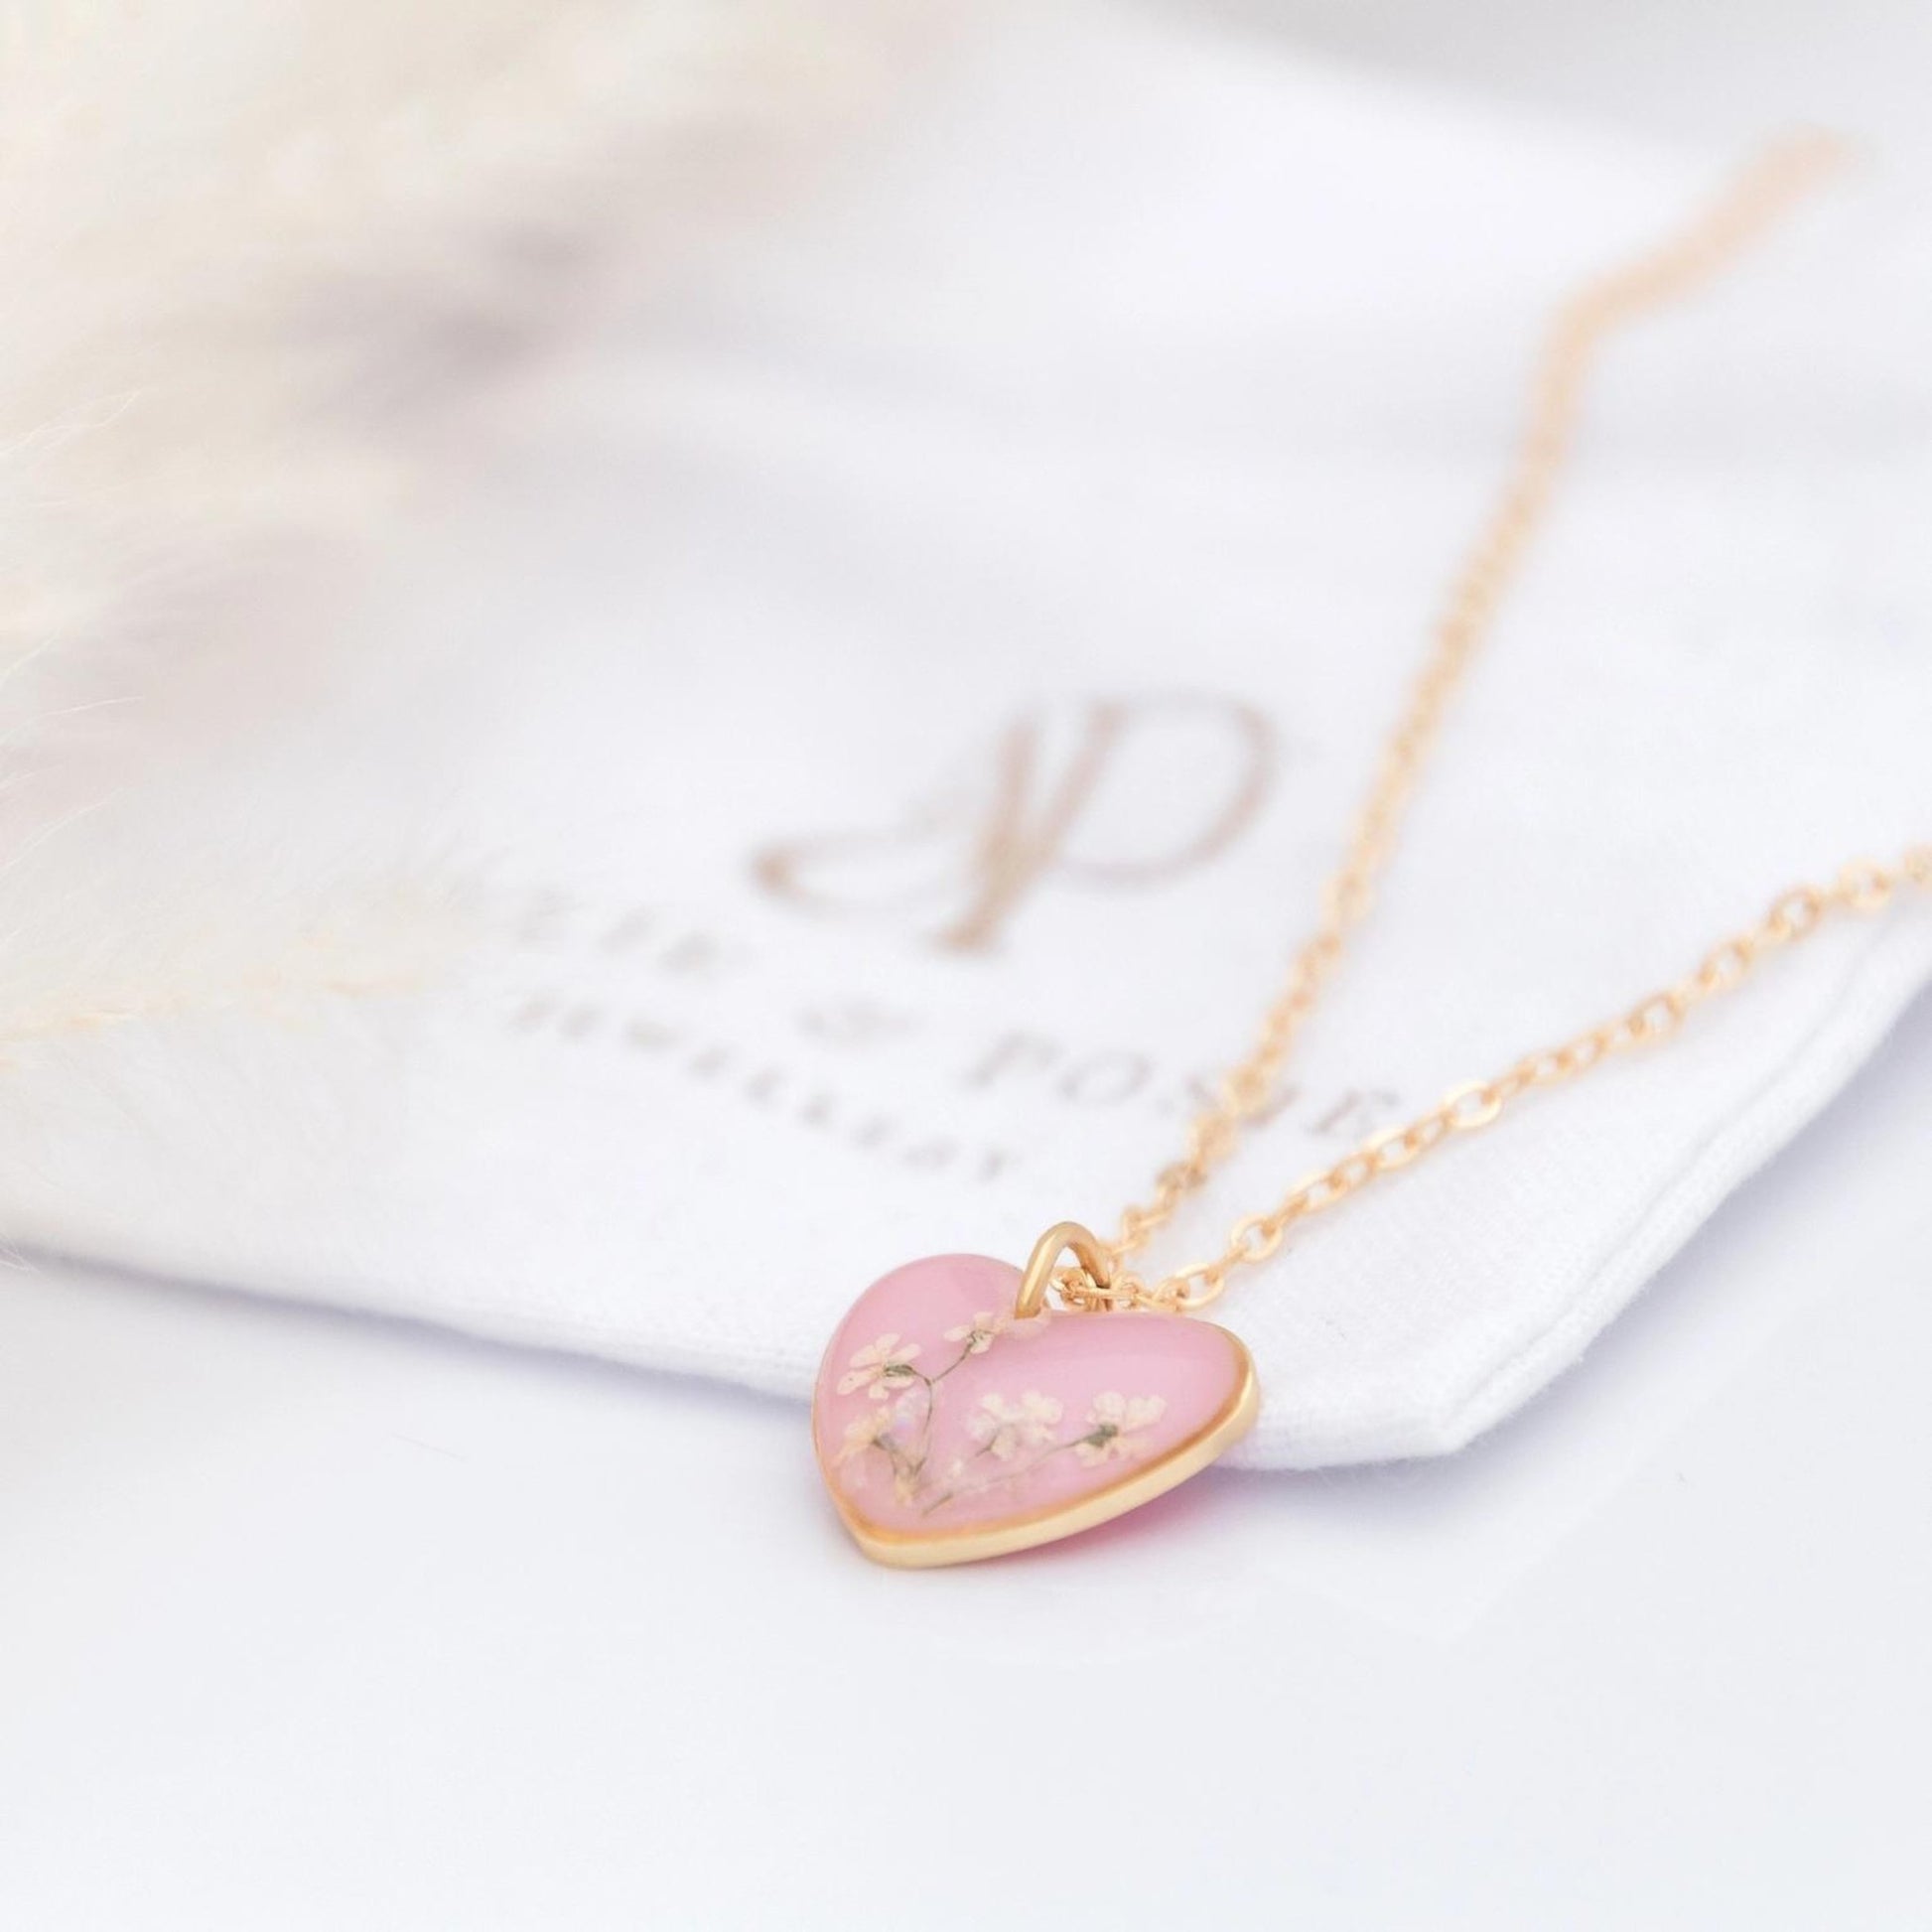 Light Pink Heart Necklace With Real White Flowers In Resin - The Little Jewellery Company